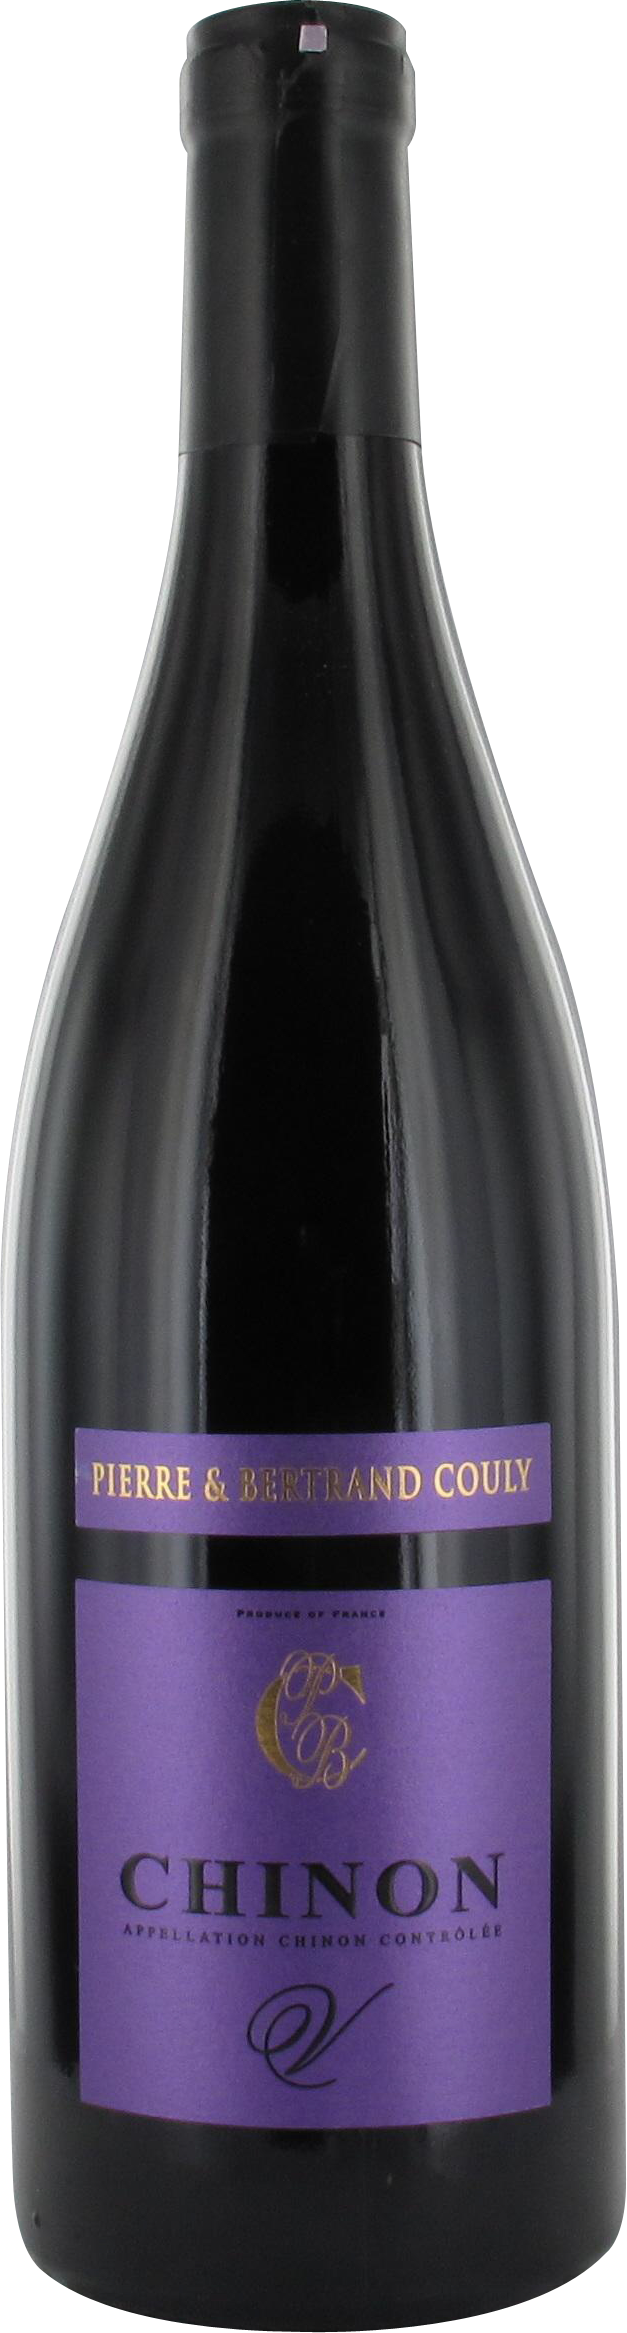 PIERRE ET BERTRAND COULY Chinon Rouge Le V 2017   (750 ml)